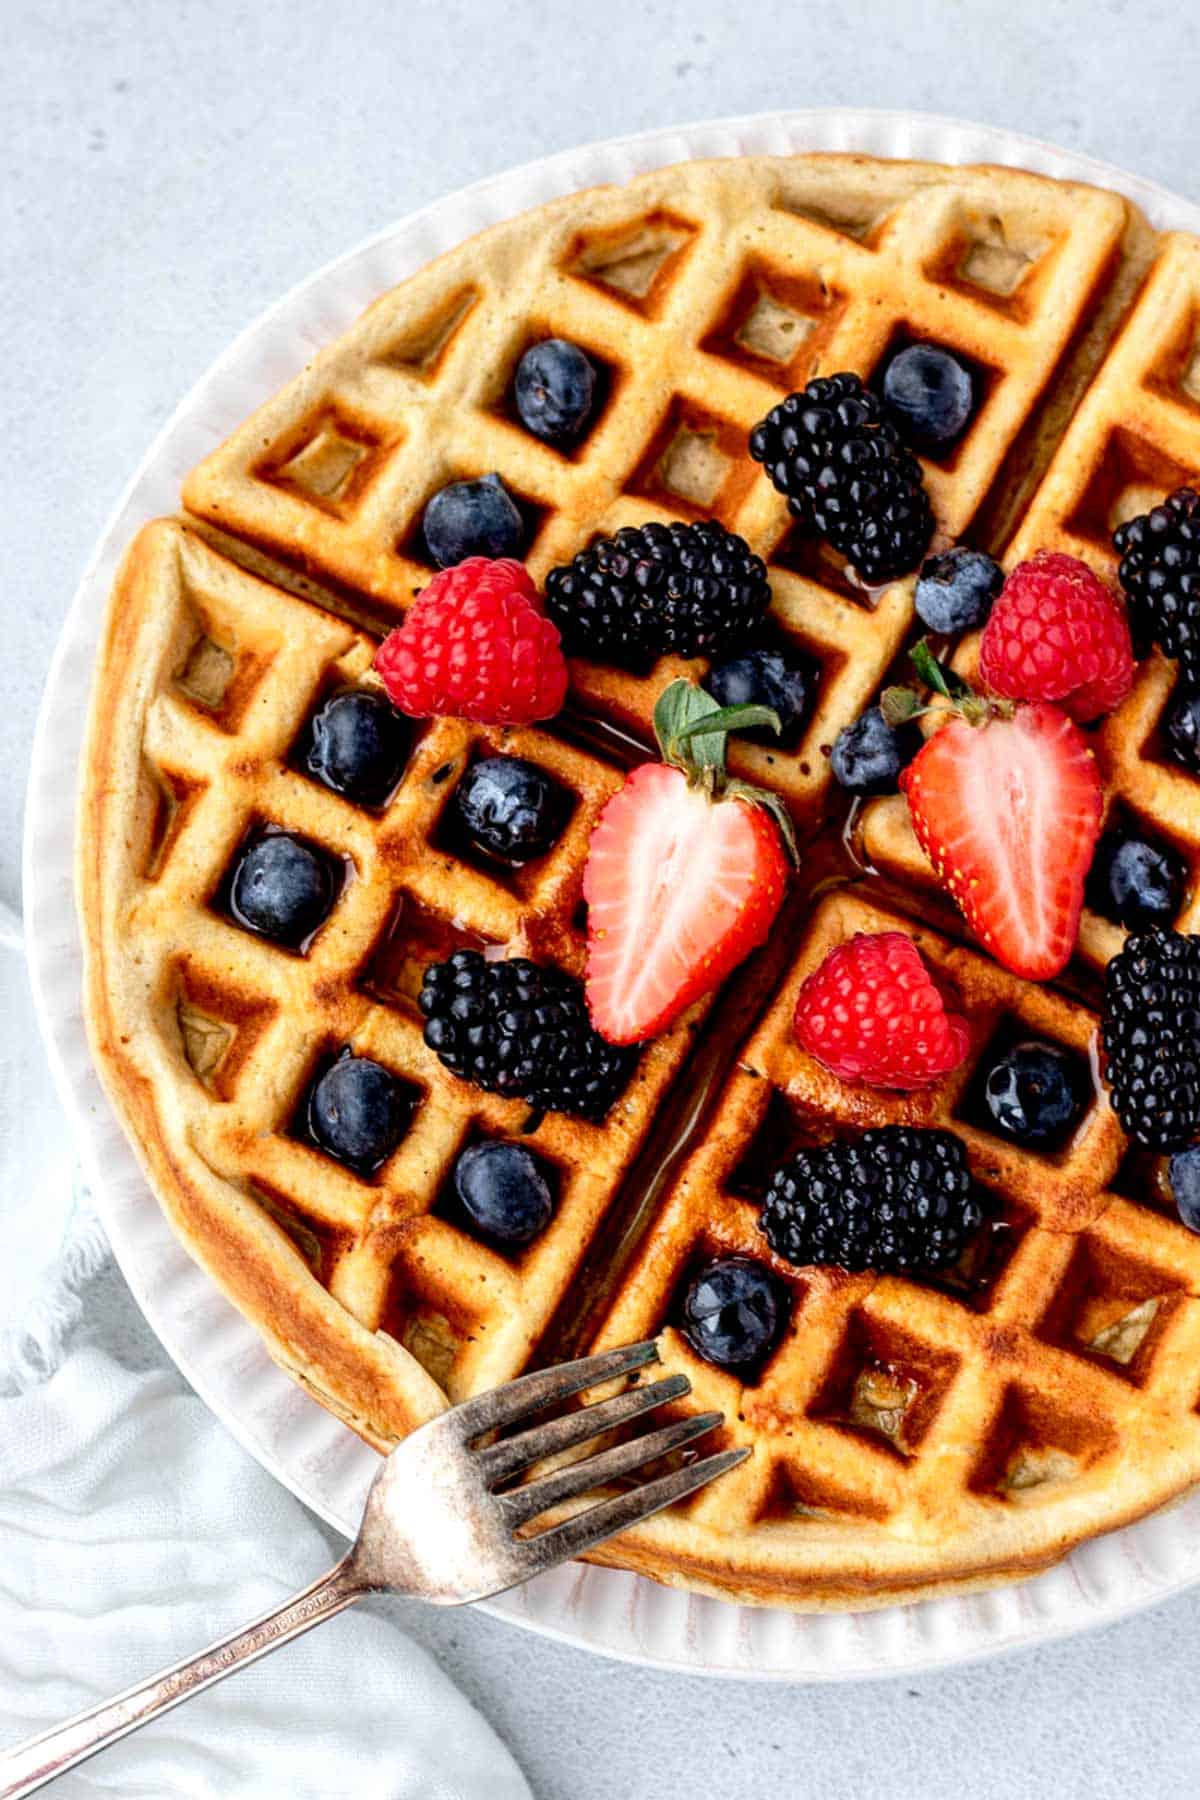 A high protein waffle, topped with mixed berries and maple syrup.